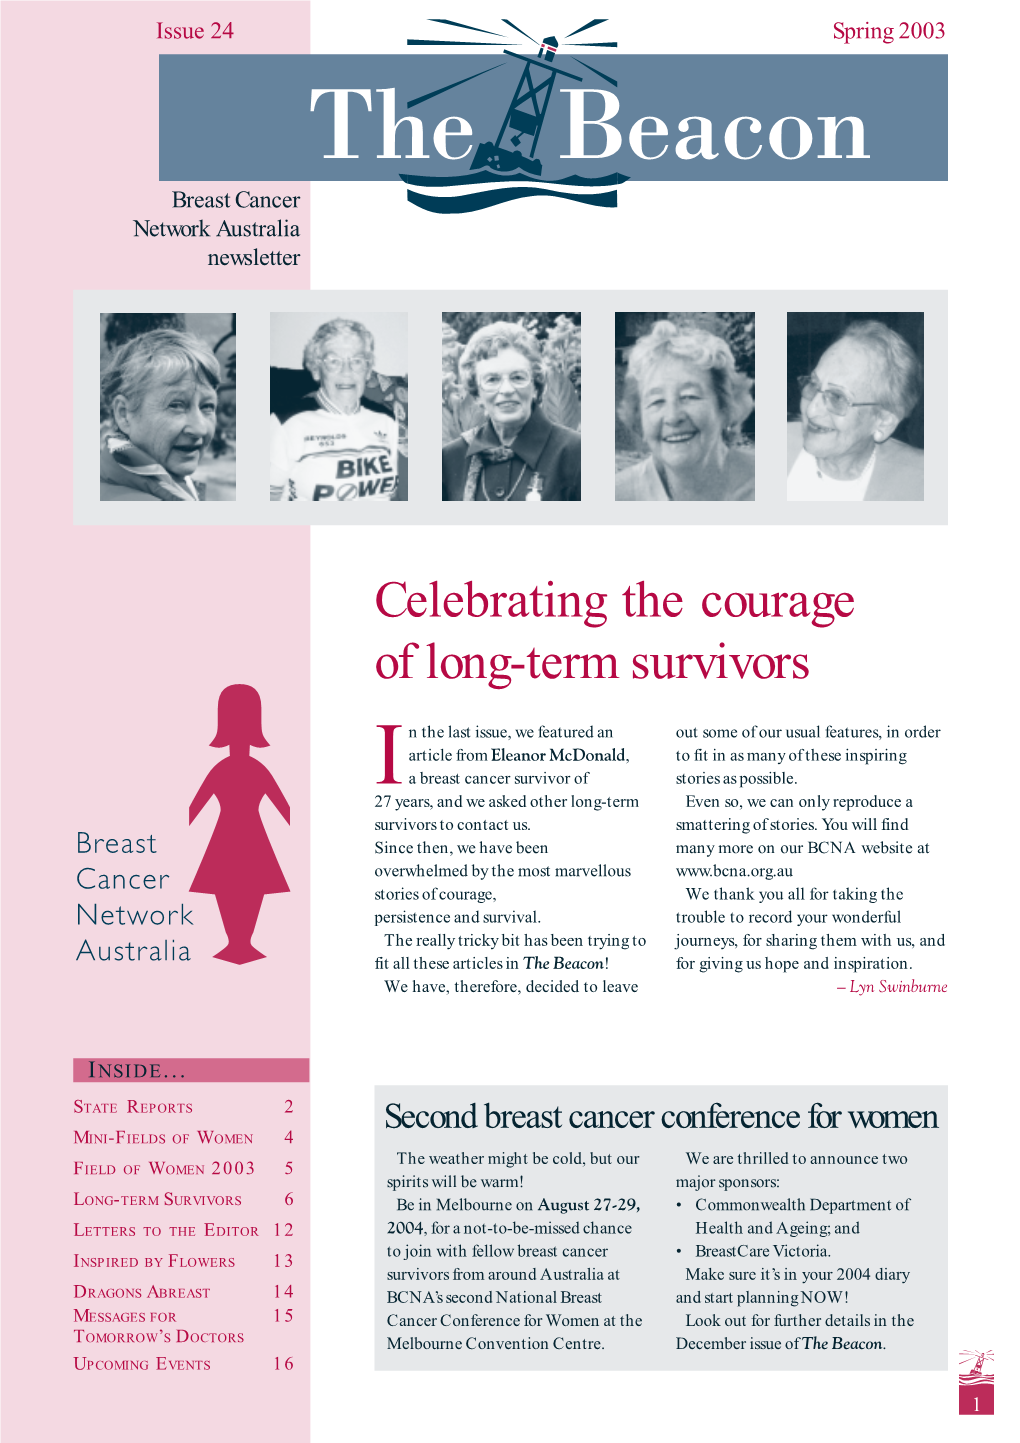 Celebrating the Courage of Long-Term Survivors